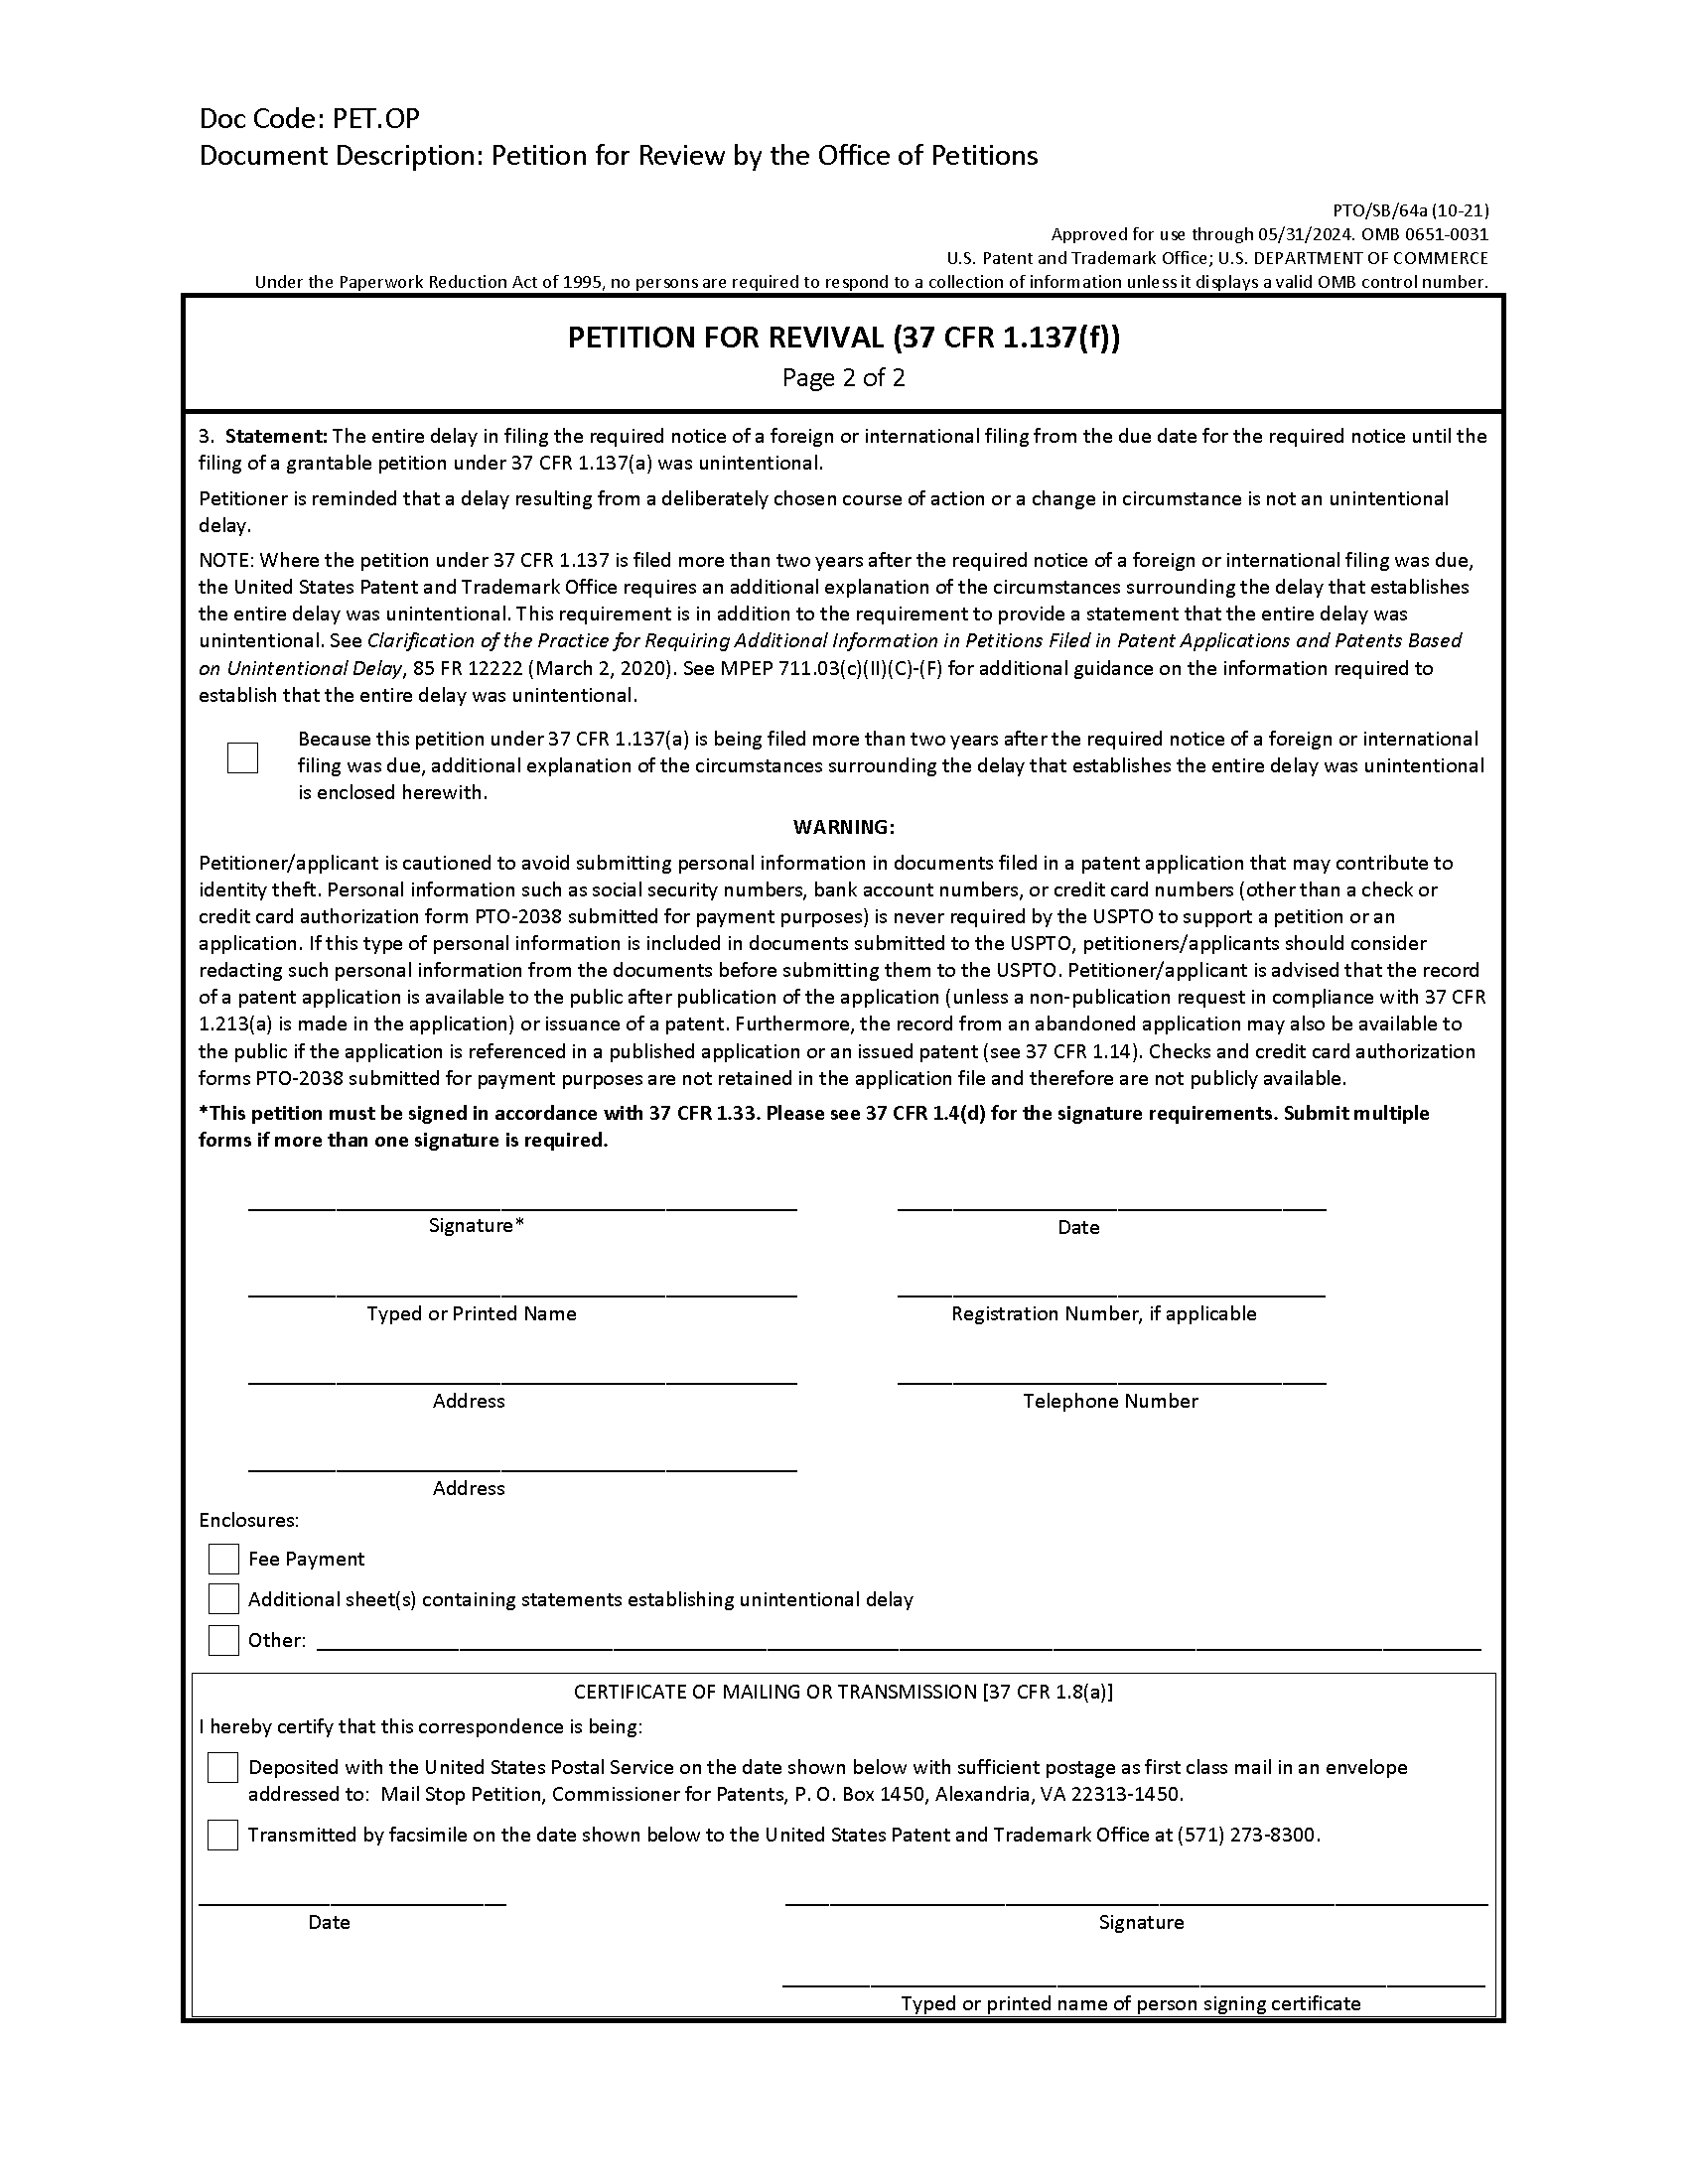 Form PTO/SB/64a Petition for Revival of an Application for Patent Abandoned for Failure To Notify the Office of a Foreign or International Filing (37 CFR 1.137(f)). [Page 2 of 2]